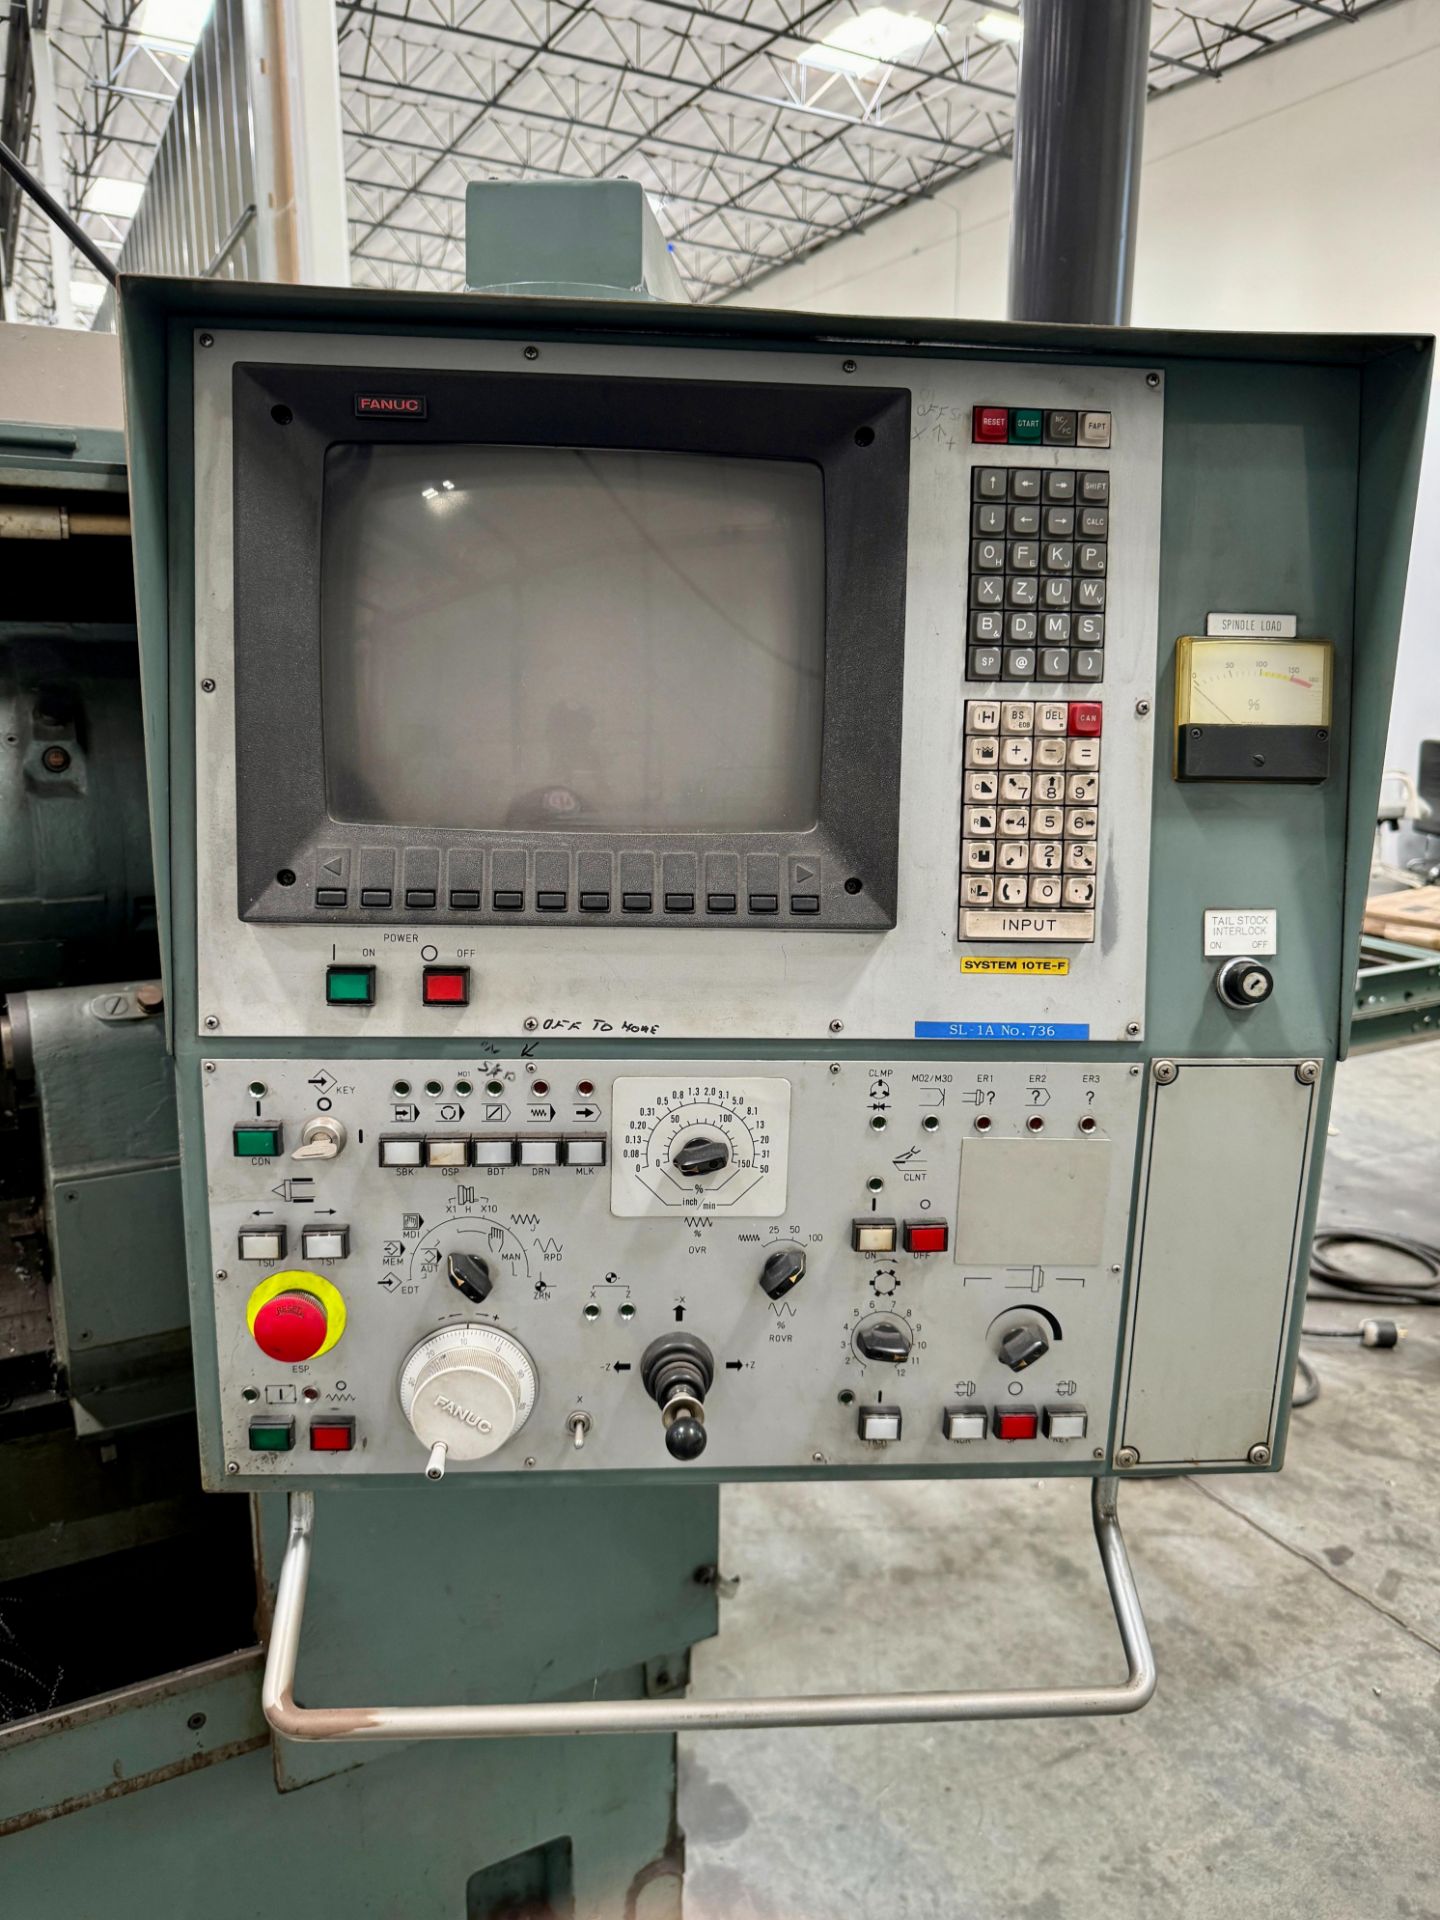 MORI SEIKI SL-1A TURNING CENTER, FANUC SYSTEM 10TE-F CONTROL, TAILSTOCK, CHIP CONVEYOR, S/N 736 - Image 3 of 17